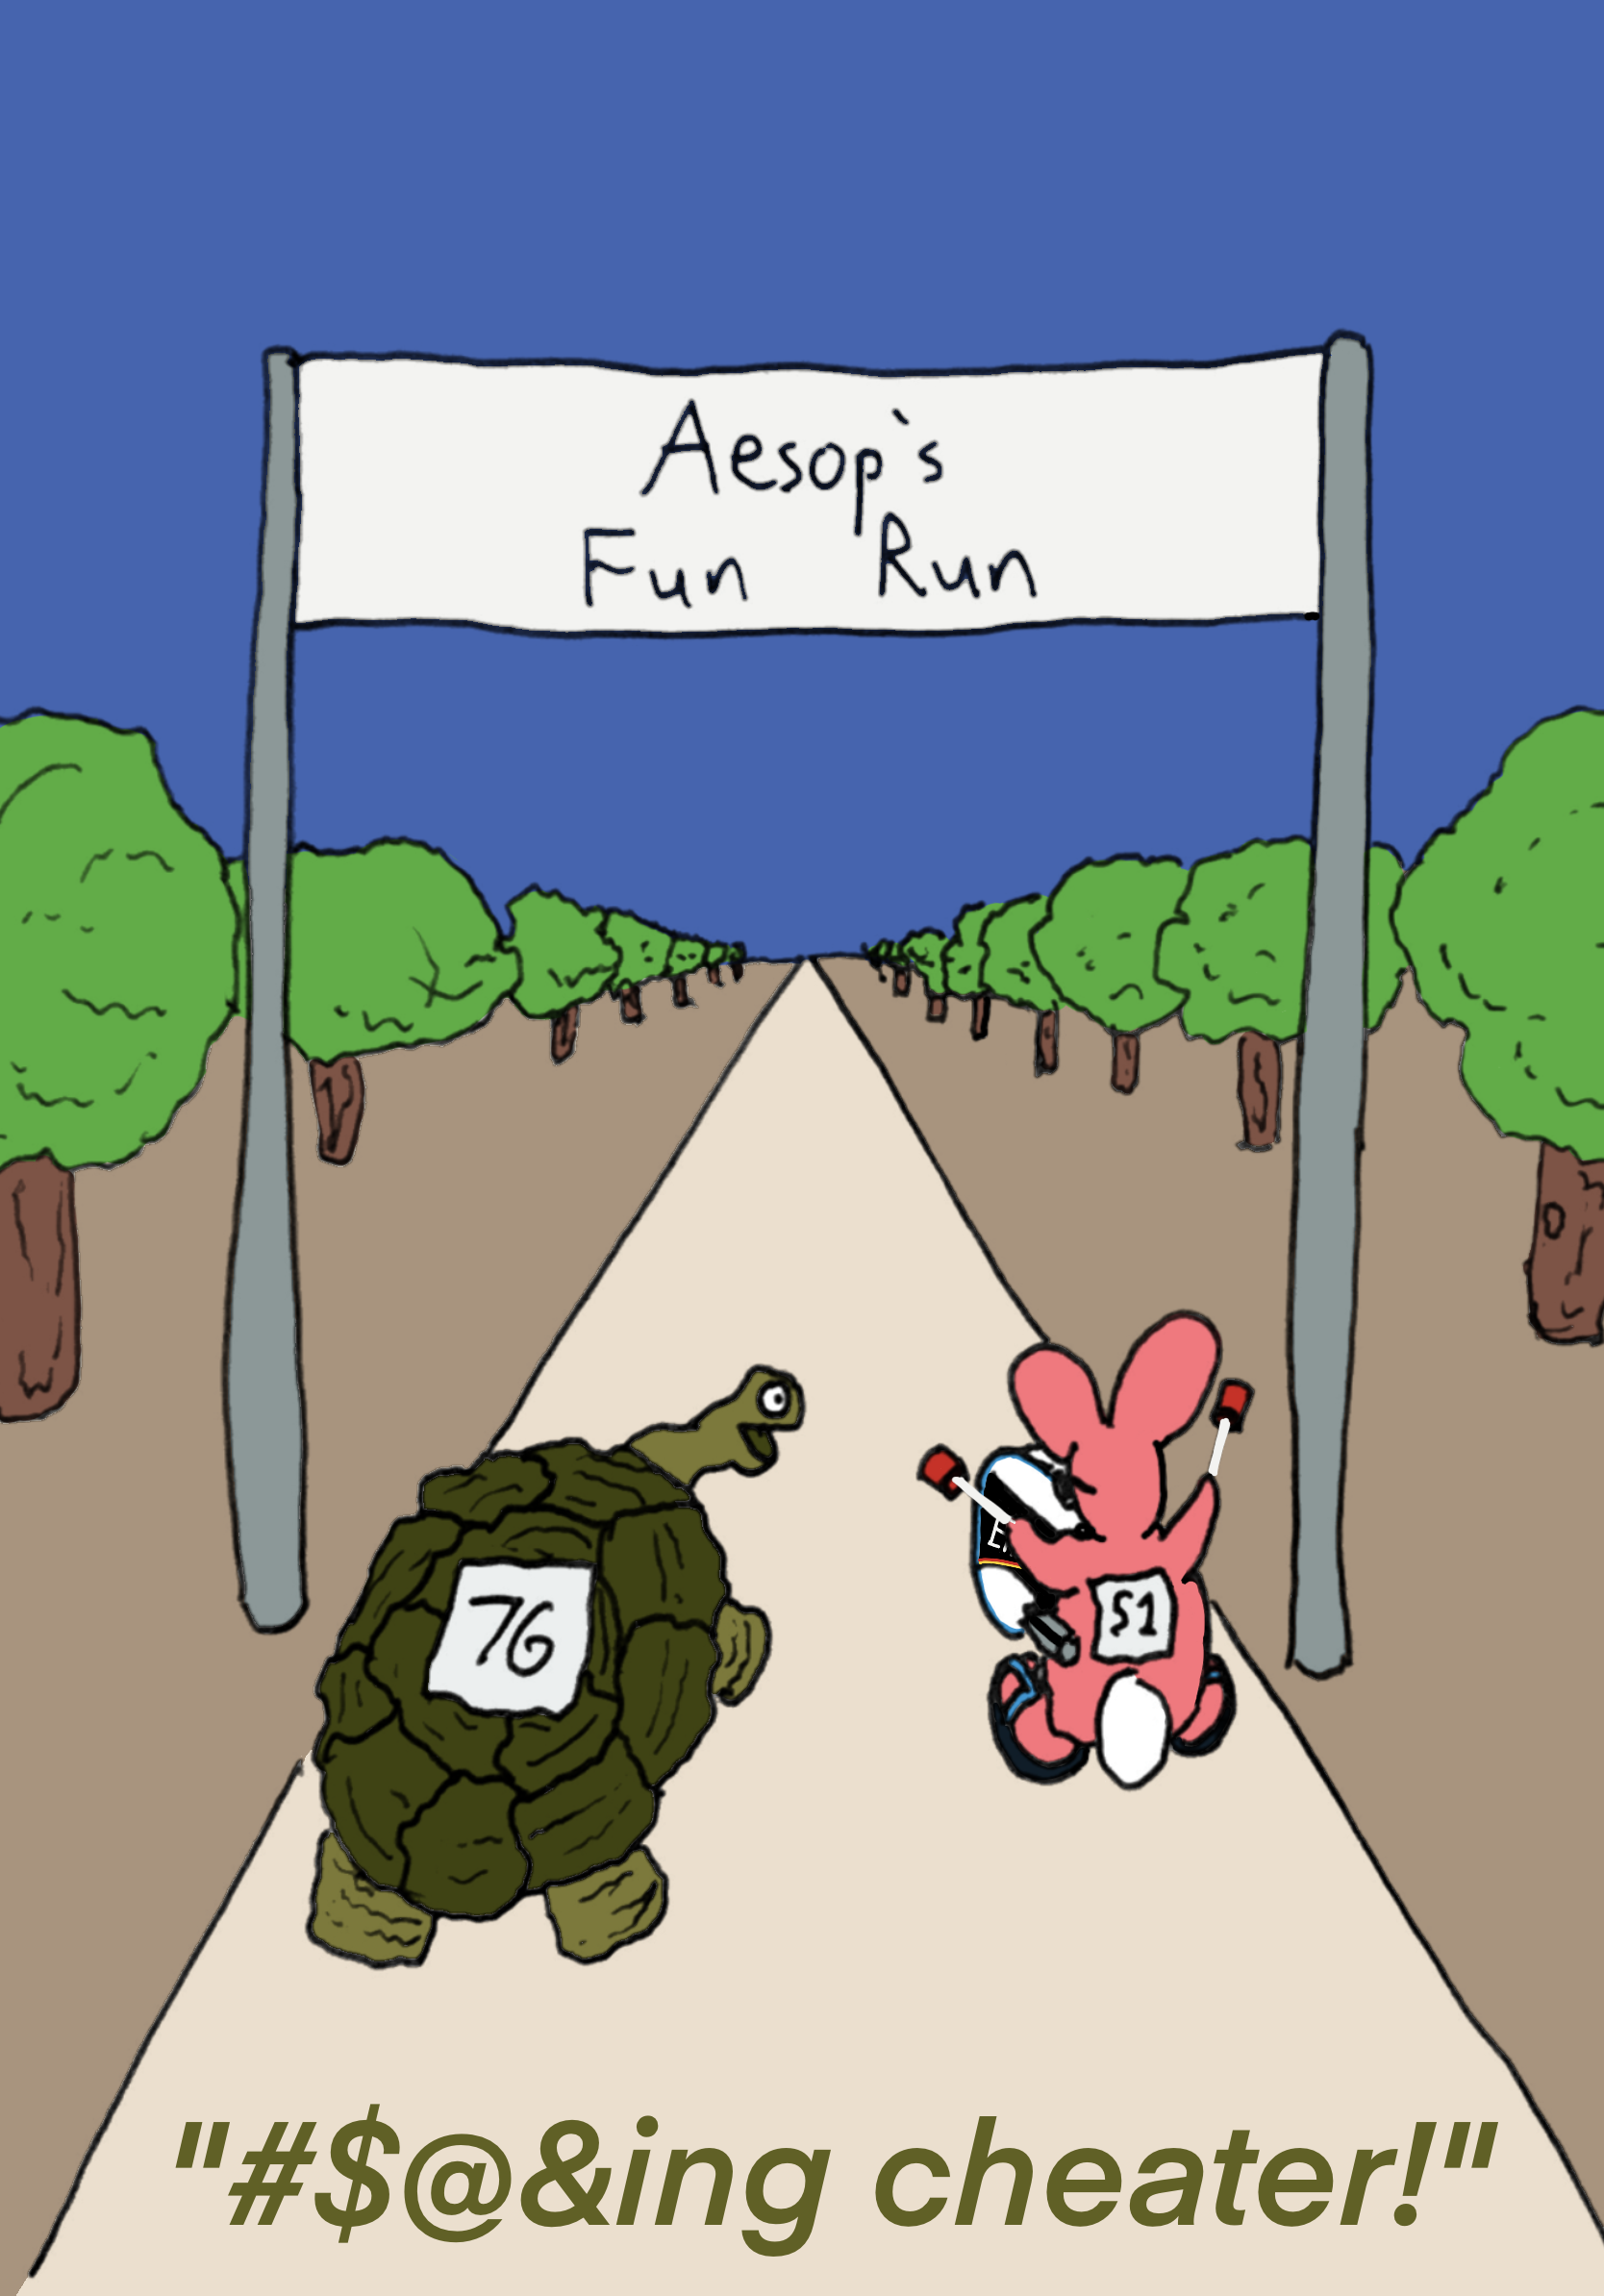 Two characters on a path, soon to pass under a sign saying “Aesop’s Fun Run”. On the left: A tortoise. On the right: An energizer bunny. Caption: “#$@&ing cheater!” 